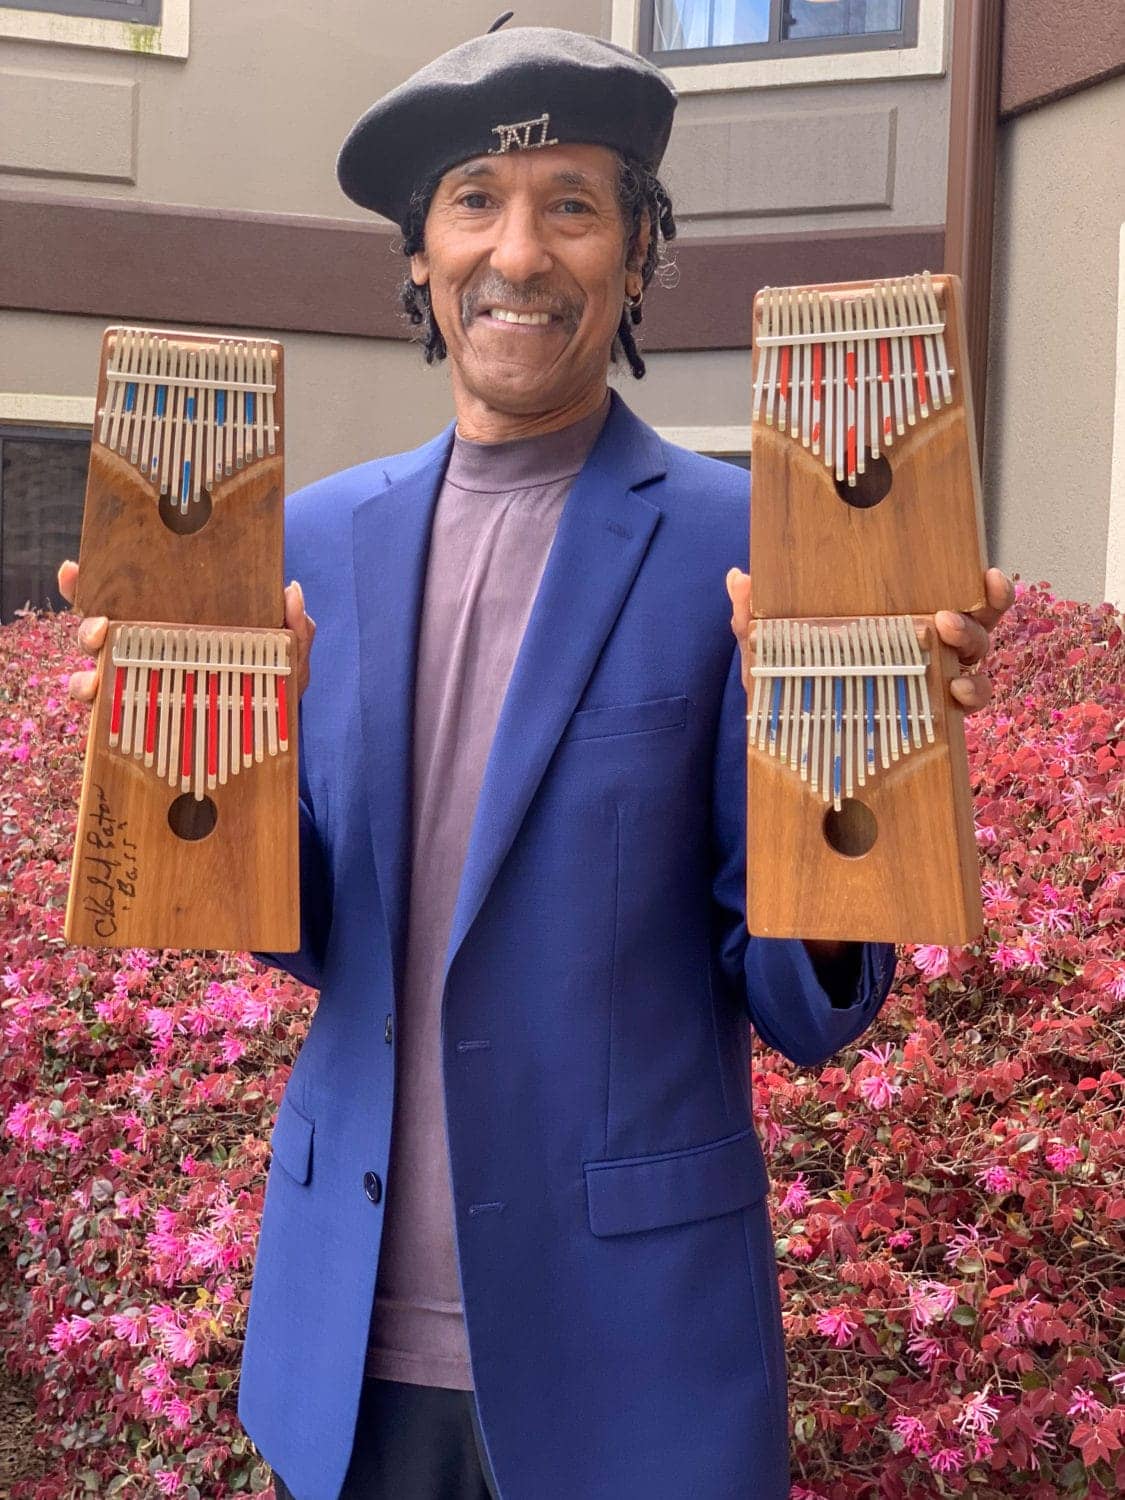 Carl-Winters-the-Kalimba-King-1, Hear Kalimba King Carl Winters play the music that’s in your blood, World News & Views 